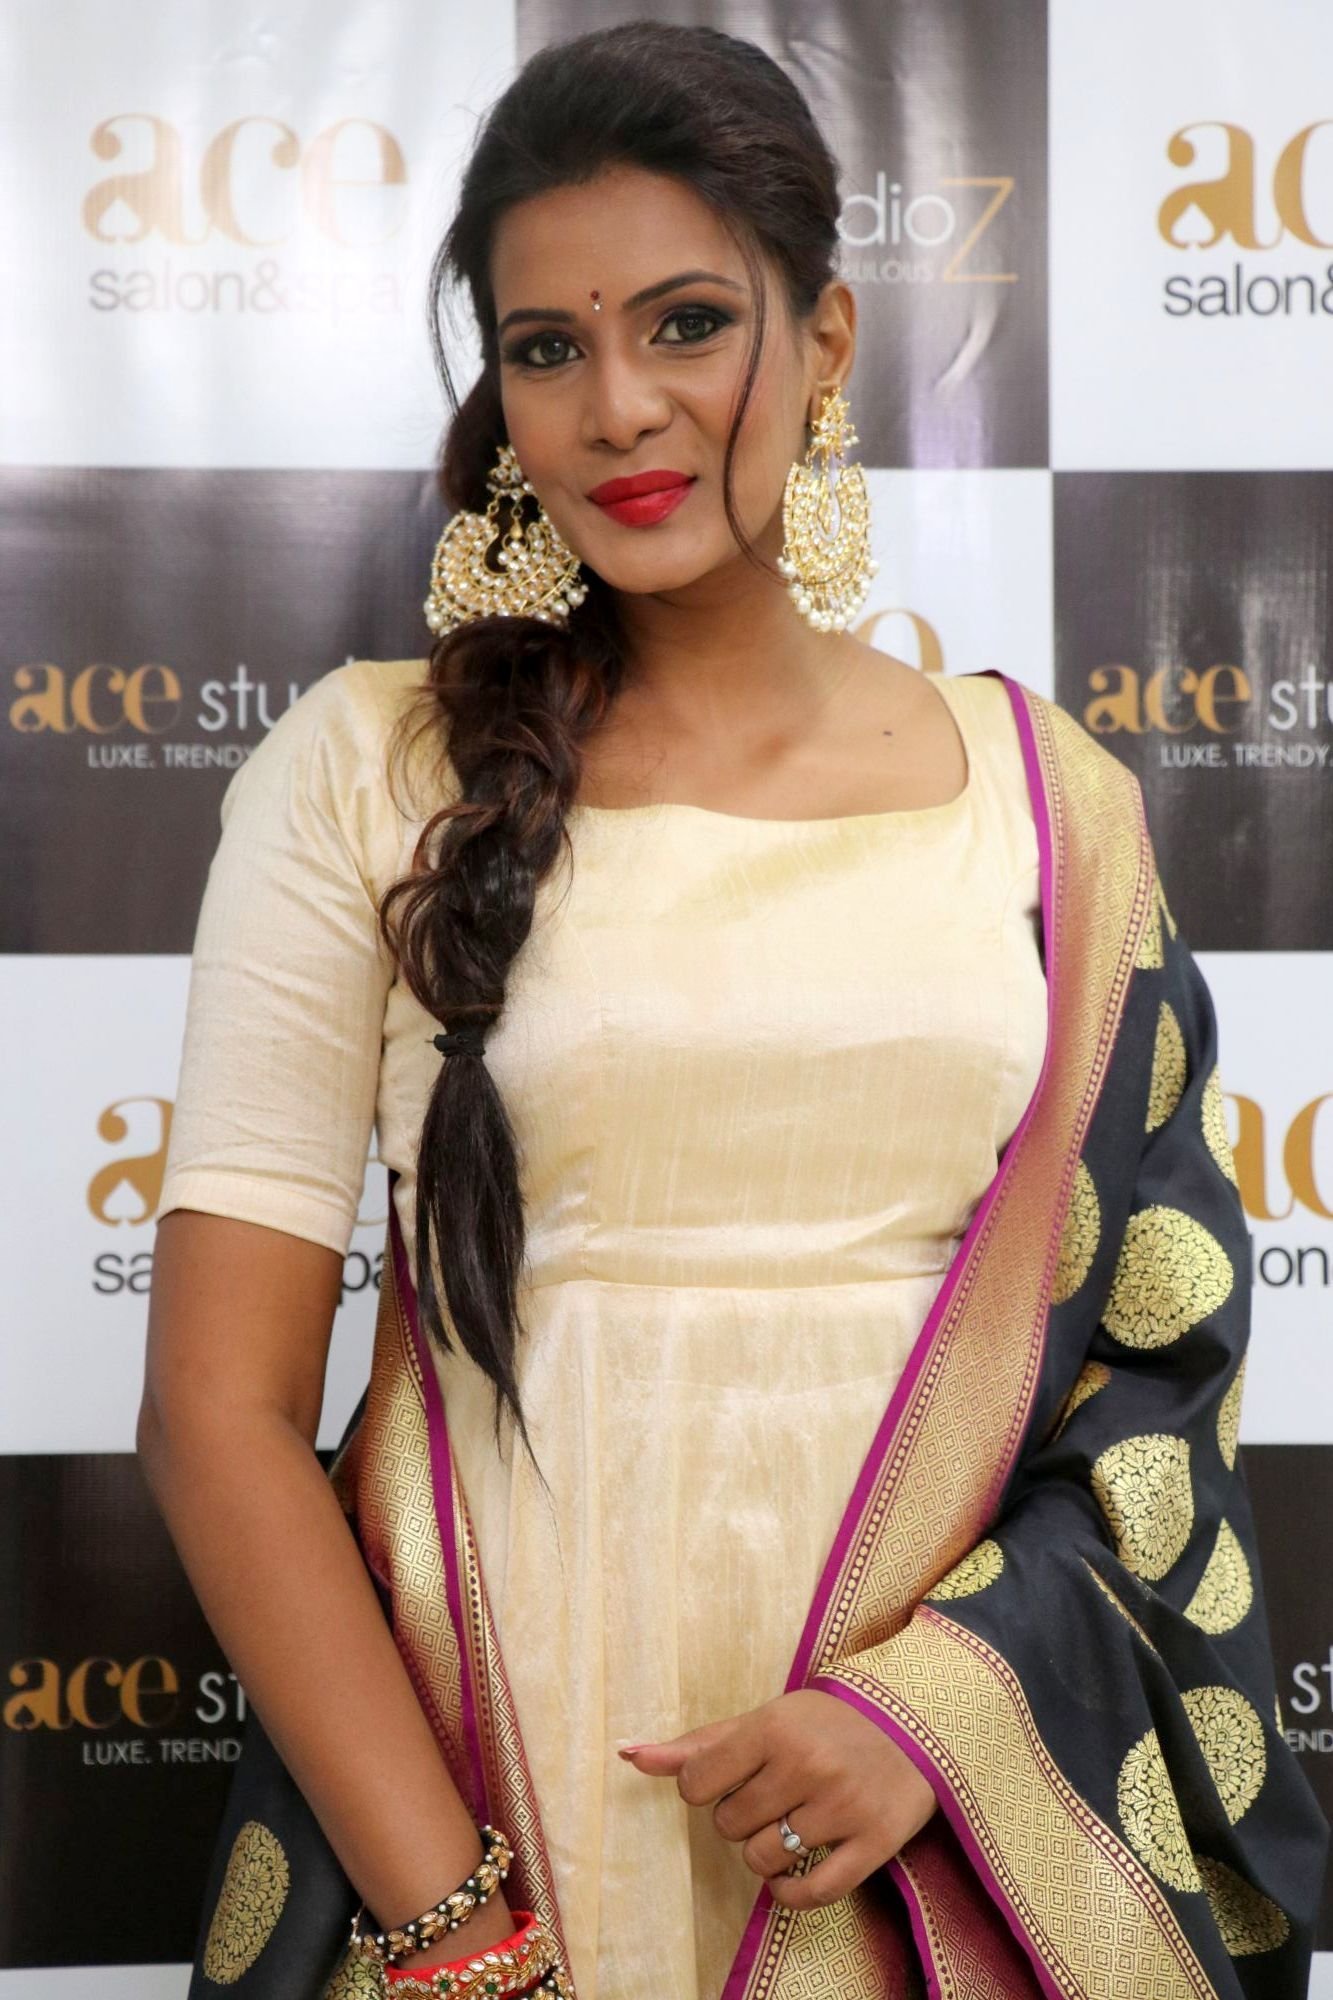 Actress Meera Mithun Launches Ace Salon and Spa in West Mambalam Photos | Picture 1499376